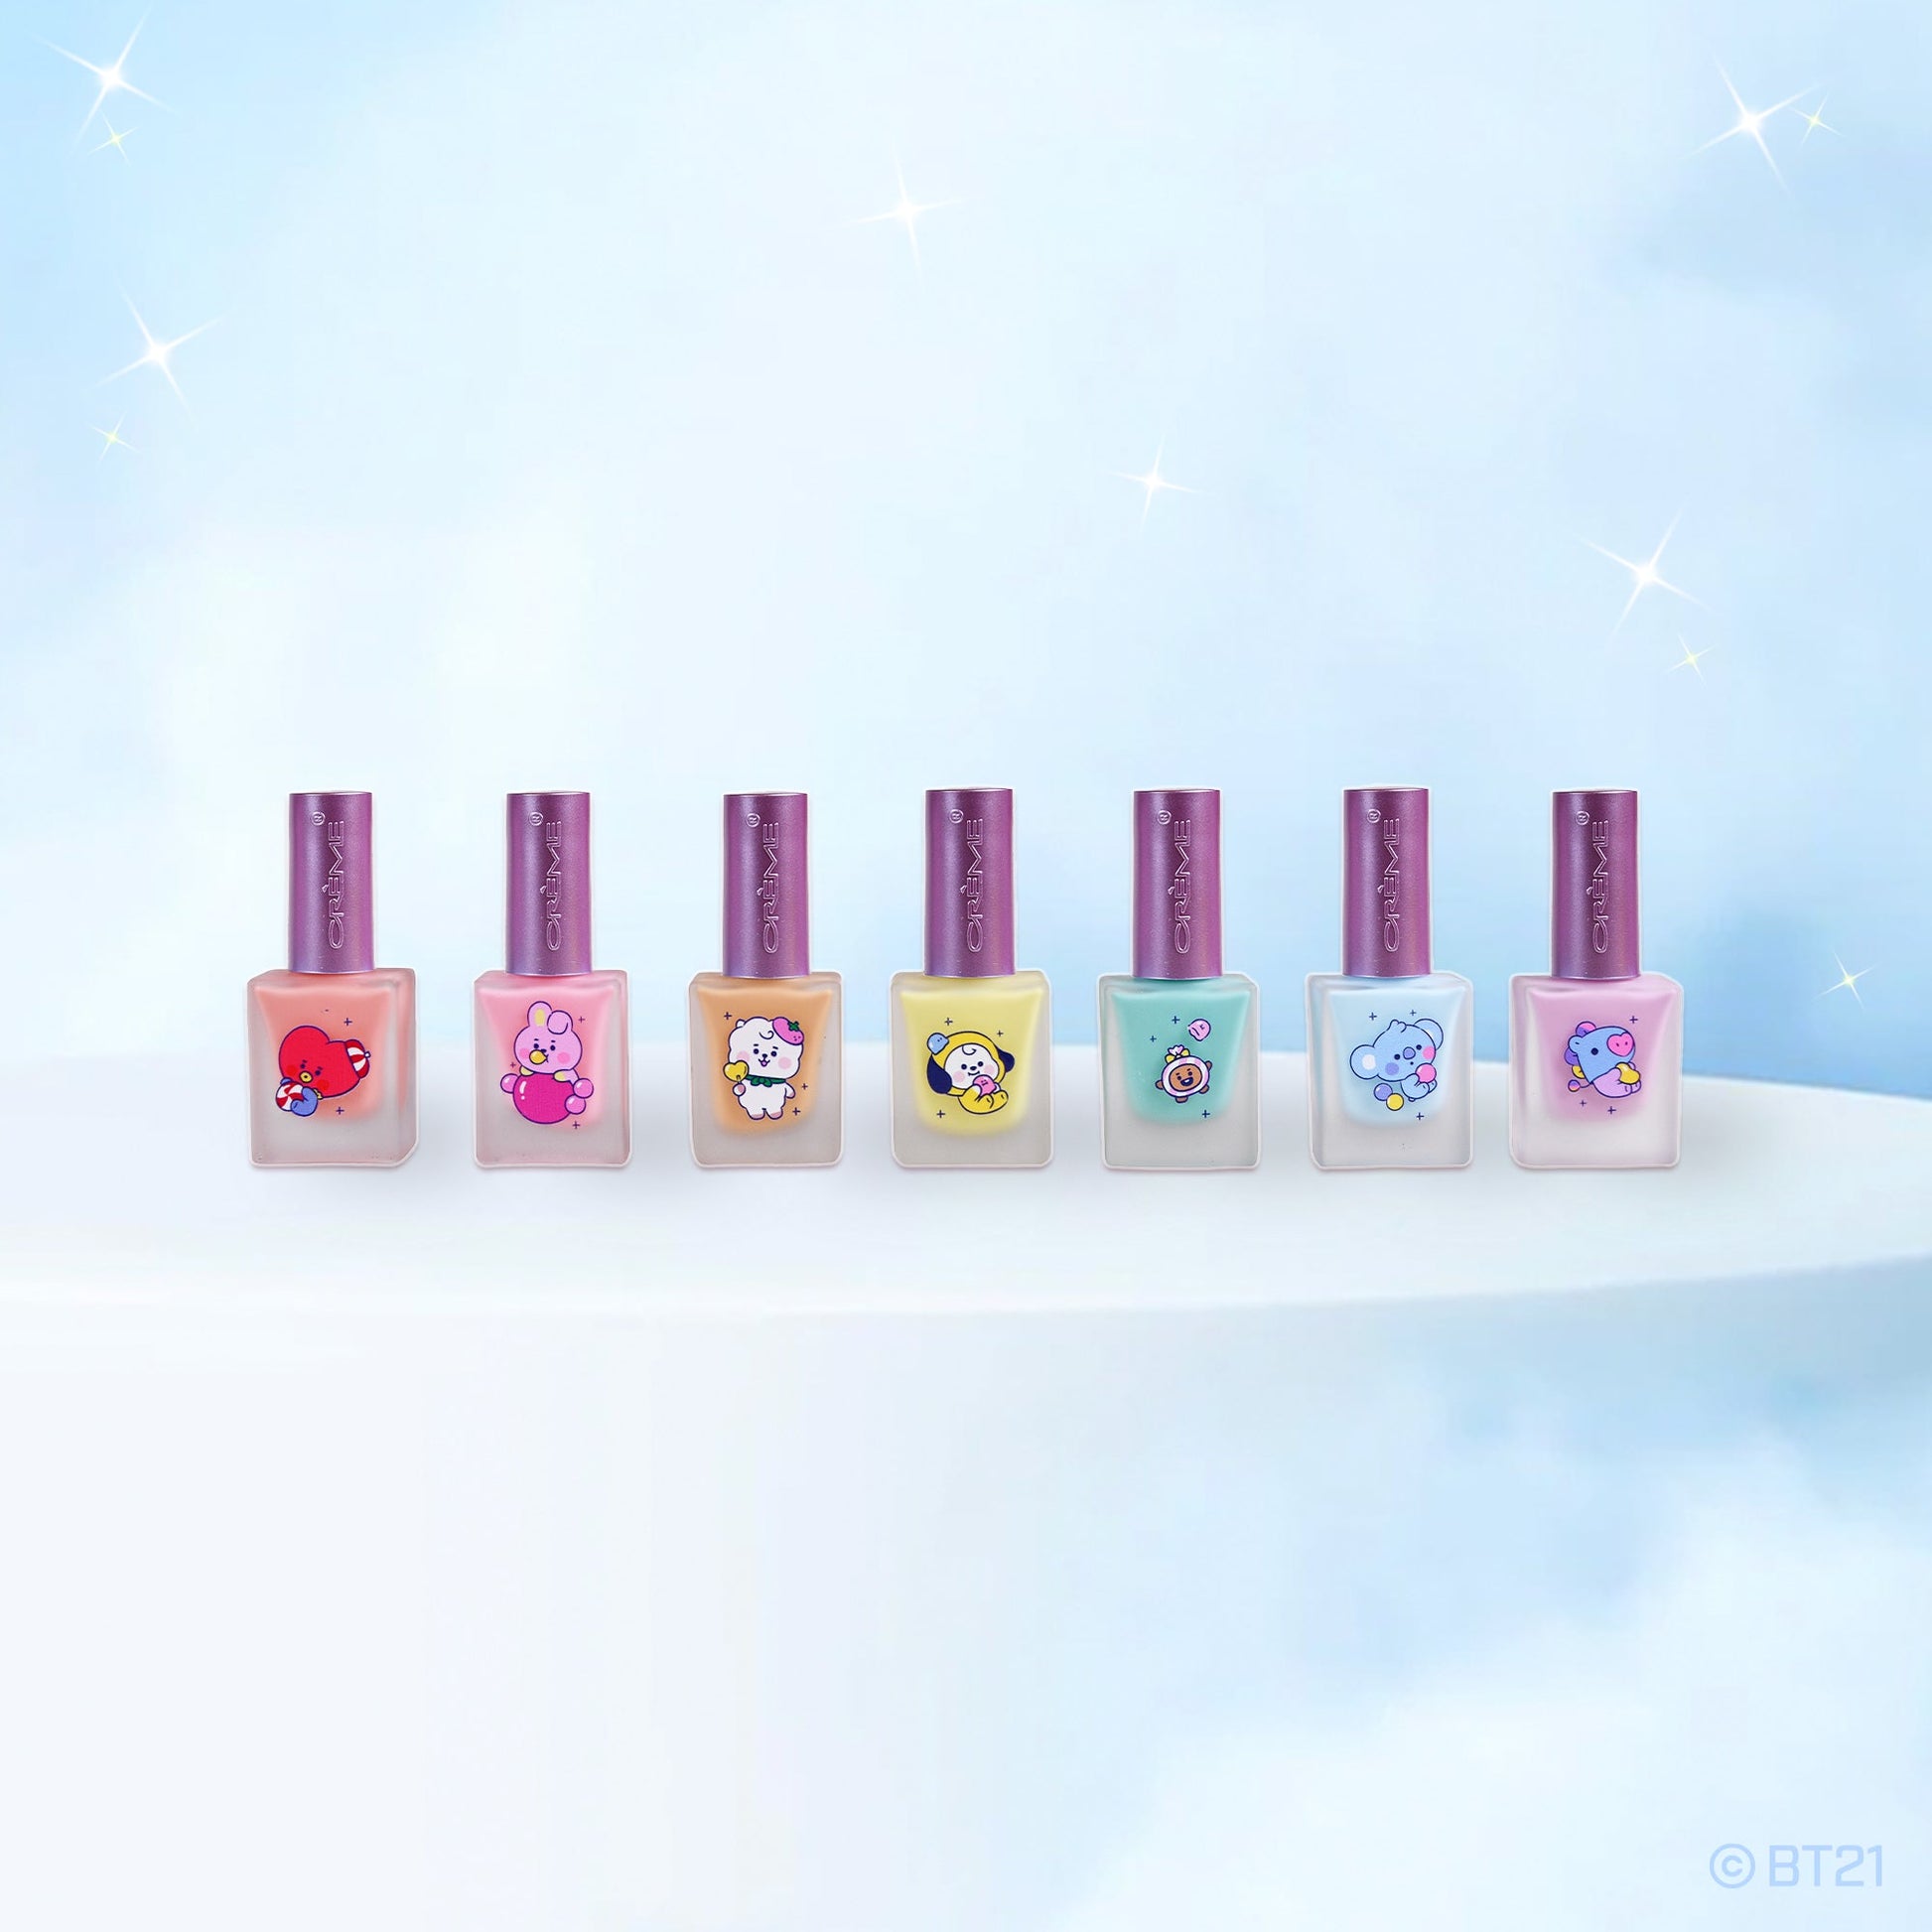 BT21 BABY Pastel Dreams Gel-Effect Nail Polish Collection (Set of 7) Nail Polishes The Crème Shop x BT21 BABY 